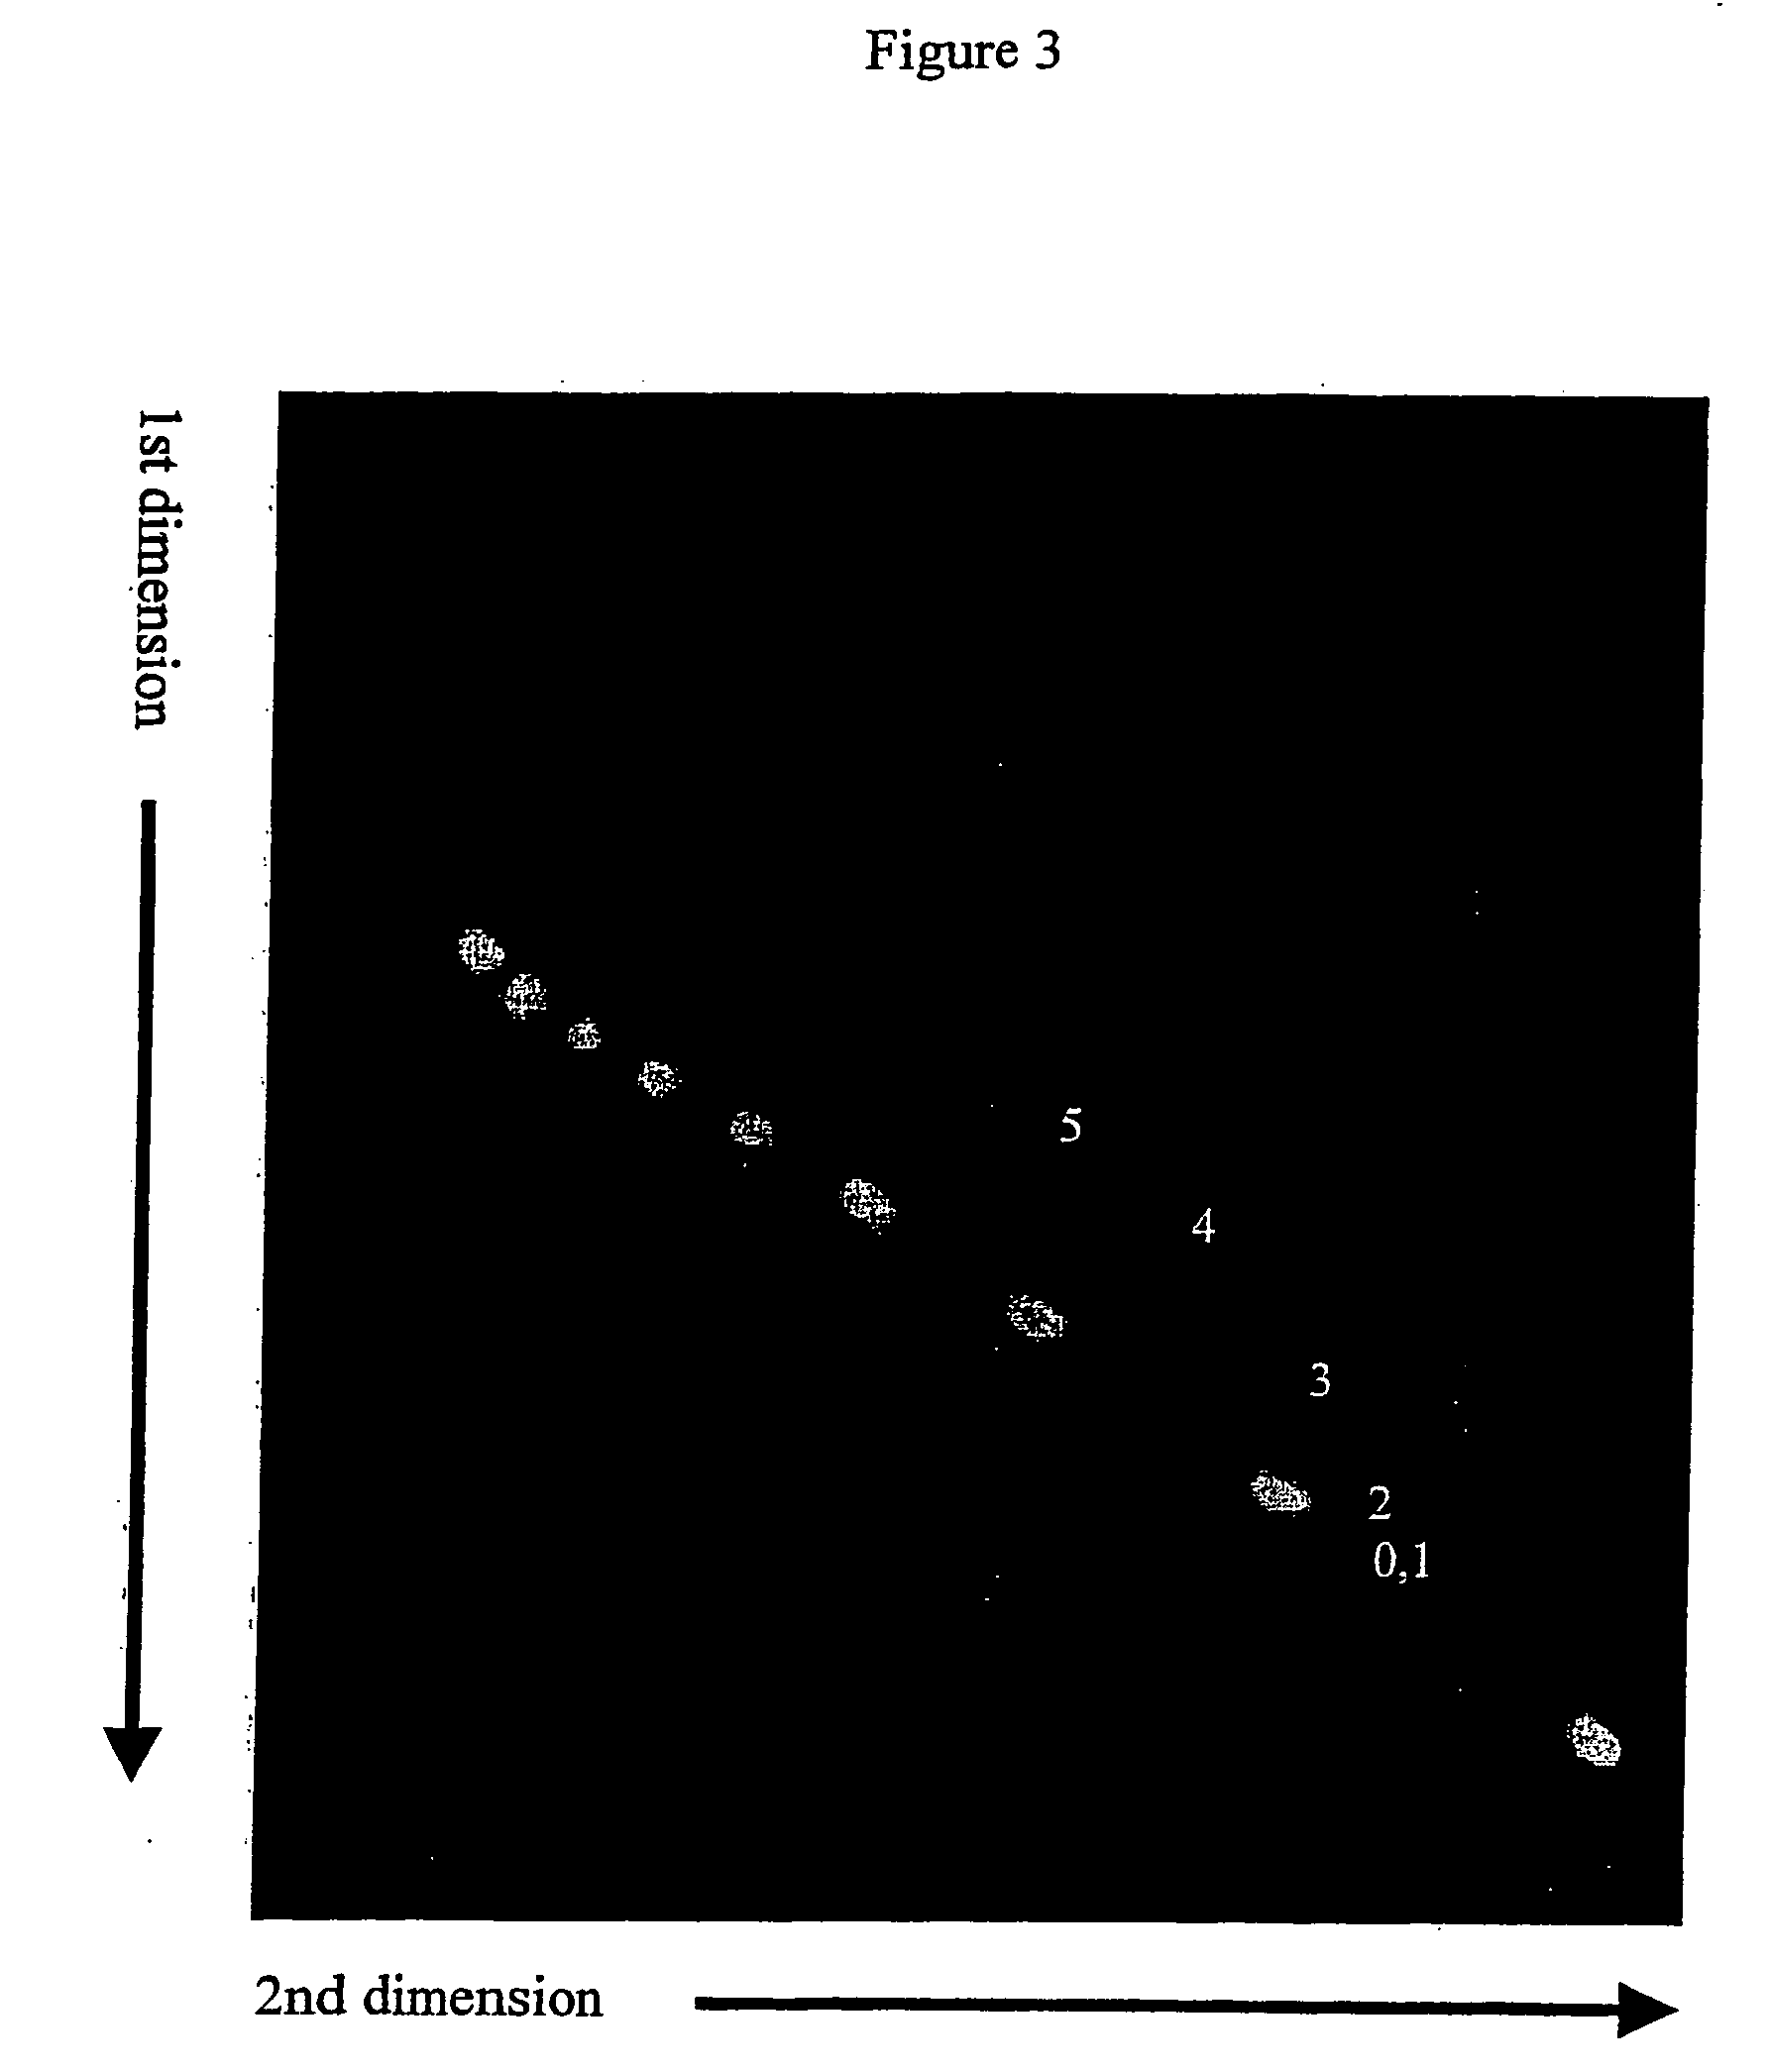 Method for two-dimensional conformation-dependent separation of non-circular nucleic acids